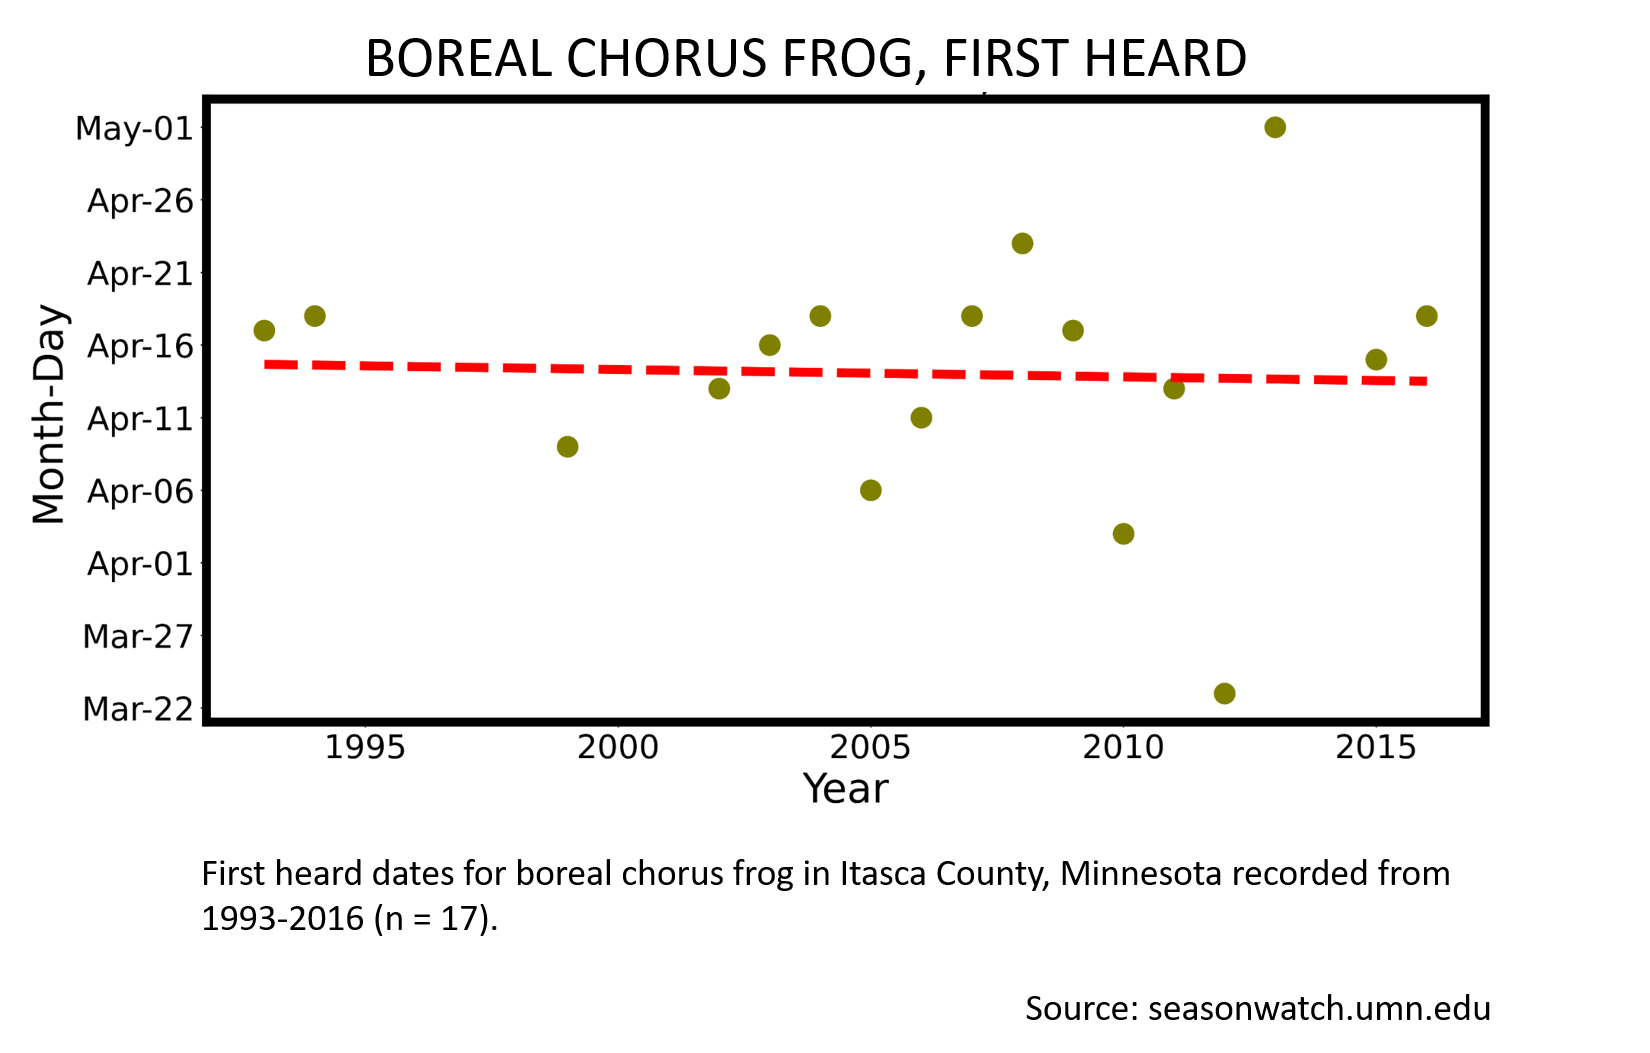 Scatterplot showing boreal chorus frog phenology in Itasca County, Minnesota